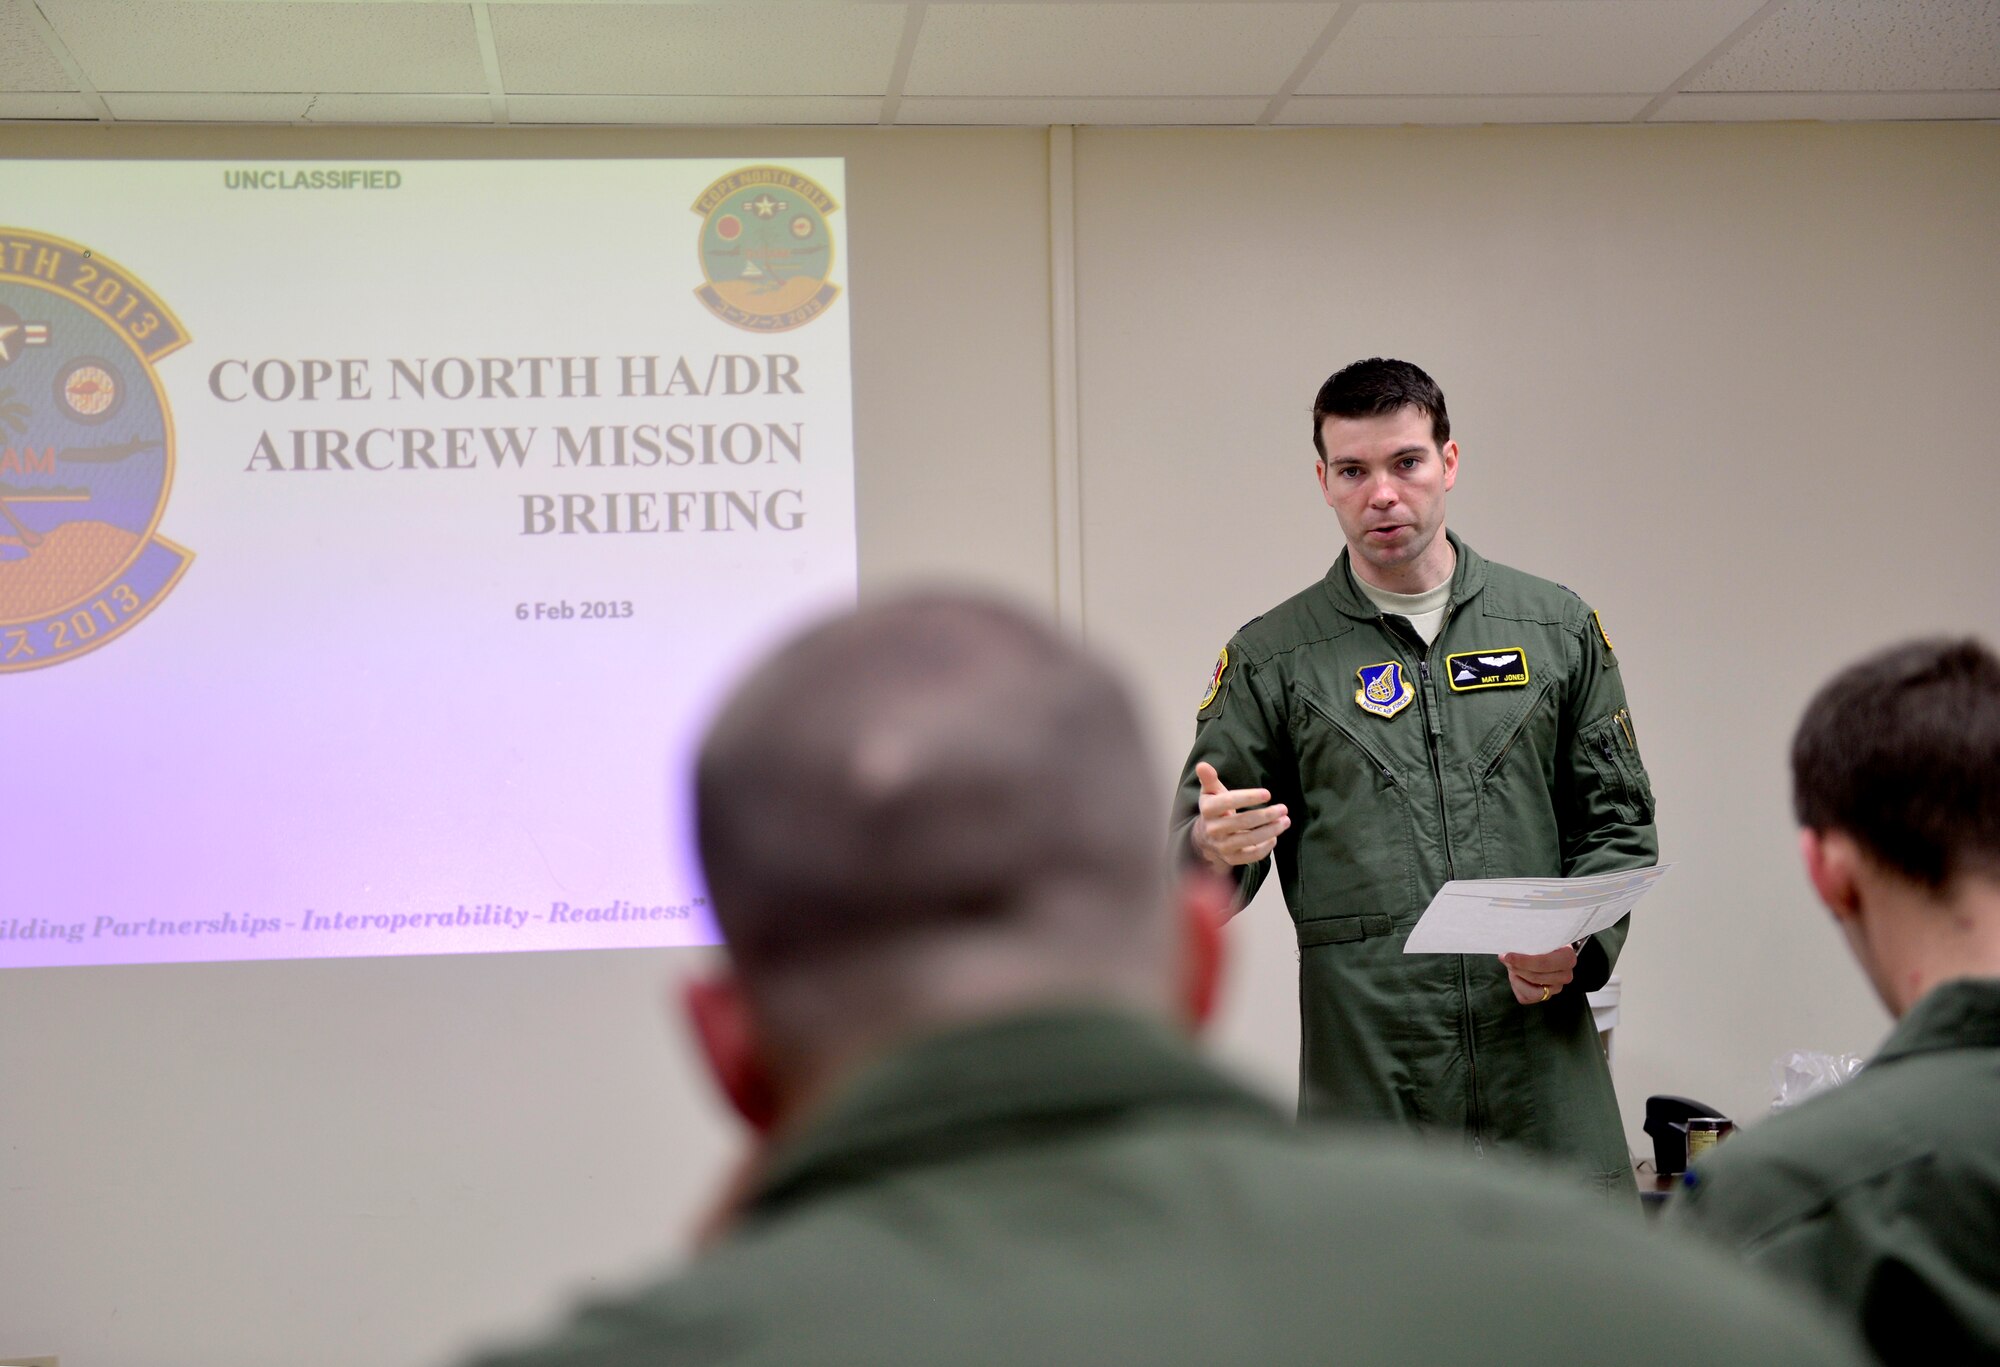 U.S. Air Force Capt. Matt Jones presents a mission brief to C-130H crews before a humanitarian aid and disaster relief flight in support of Cope North 13 on Anderson Air Force Base, Guam, Feb. 6, 2013.  The flight took passengers and cargo to the islands of Saipan and Tinian.  Cope North is an annual air combat tactics, humanitarian assistance and disaster relief exercise designed to increase the readiness and interoperability of the U.S. Air Force, Japan Air Self-Defense Force and Royal Australian Air Force. (U.S. Air Force photo by Senior Airman Matthew Bruch/Released)